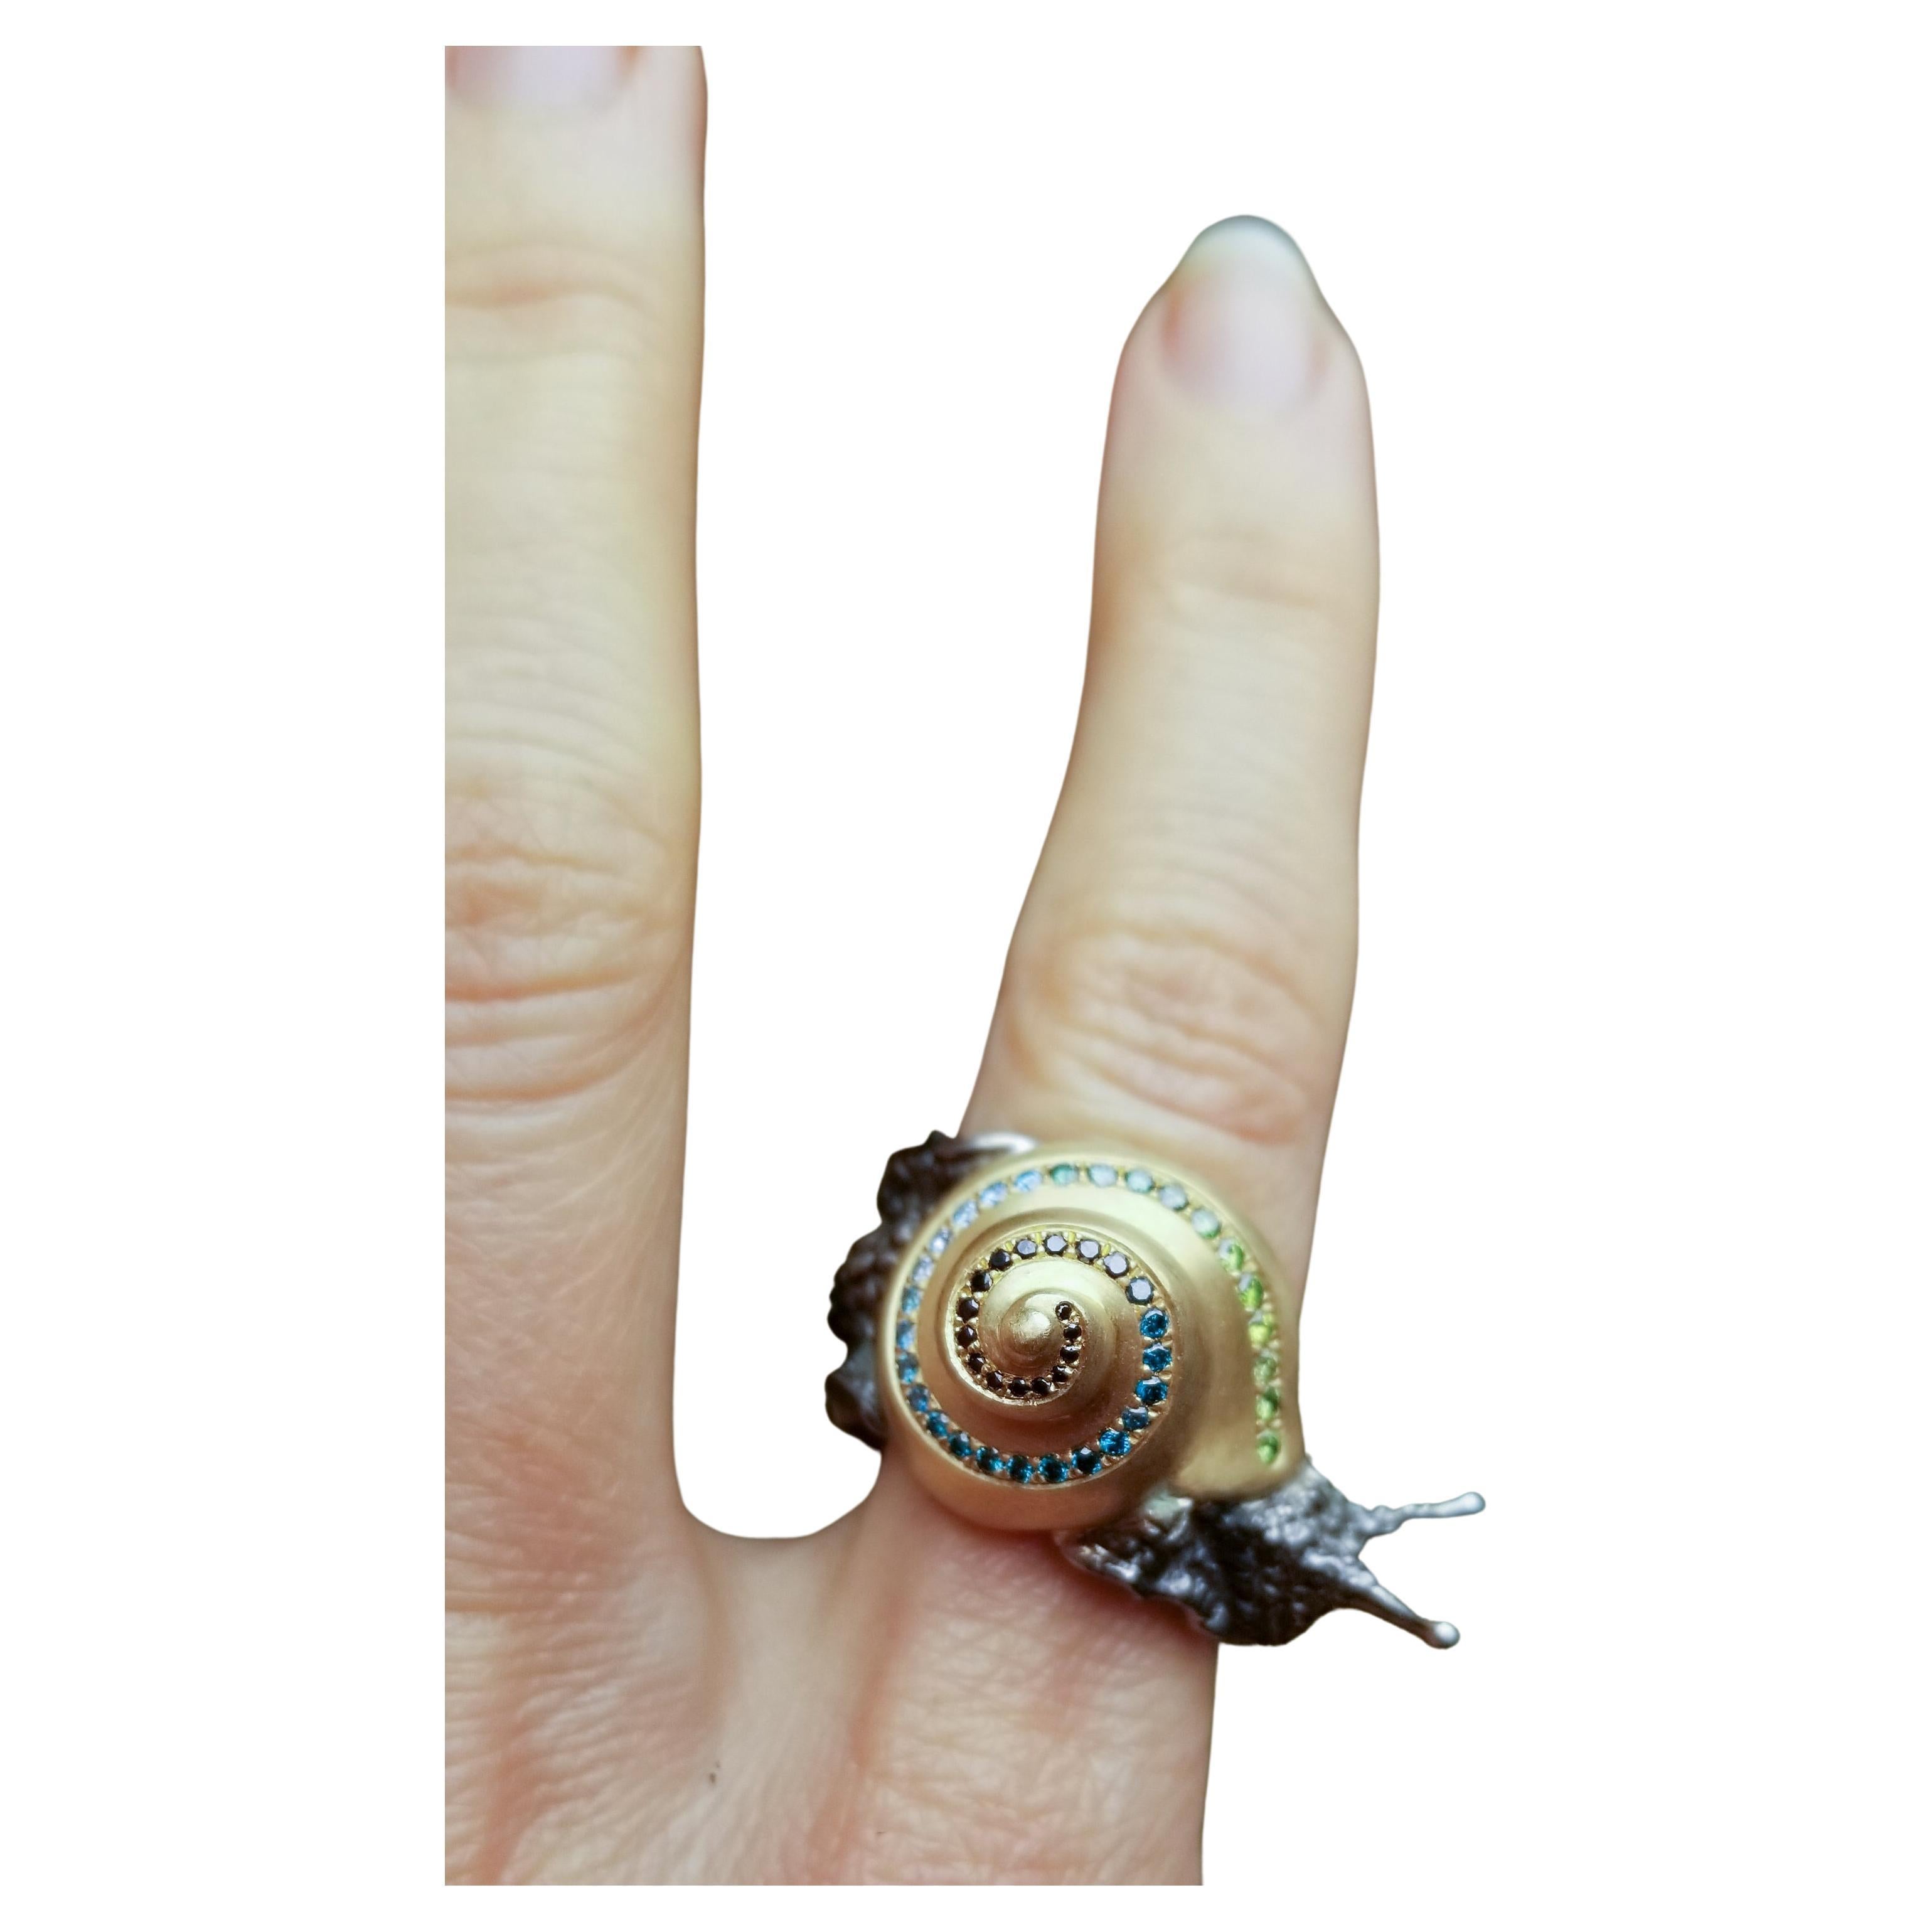 18k yellow gold, sterling silver, green and blue diamonds. One-of-a-kind.

This beautiful creature crawls comfortably around one finger.
His glossy, black-rhodium-plated silver body emerges from his satin-finished 18k recycled yellow gold shell,